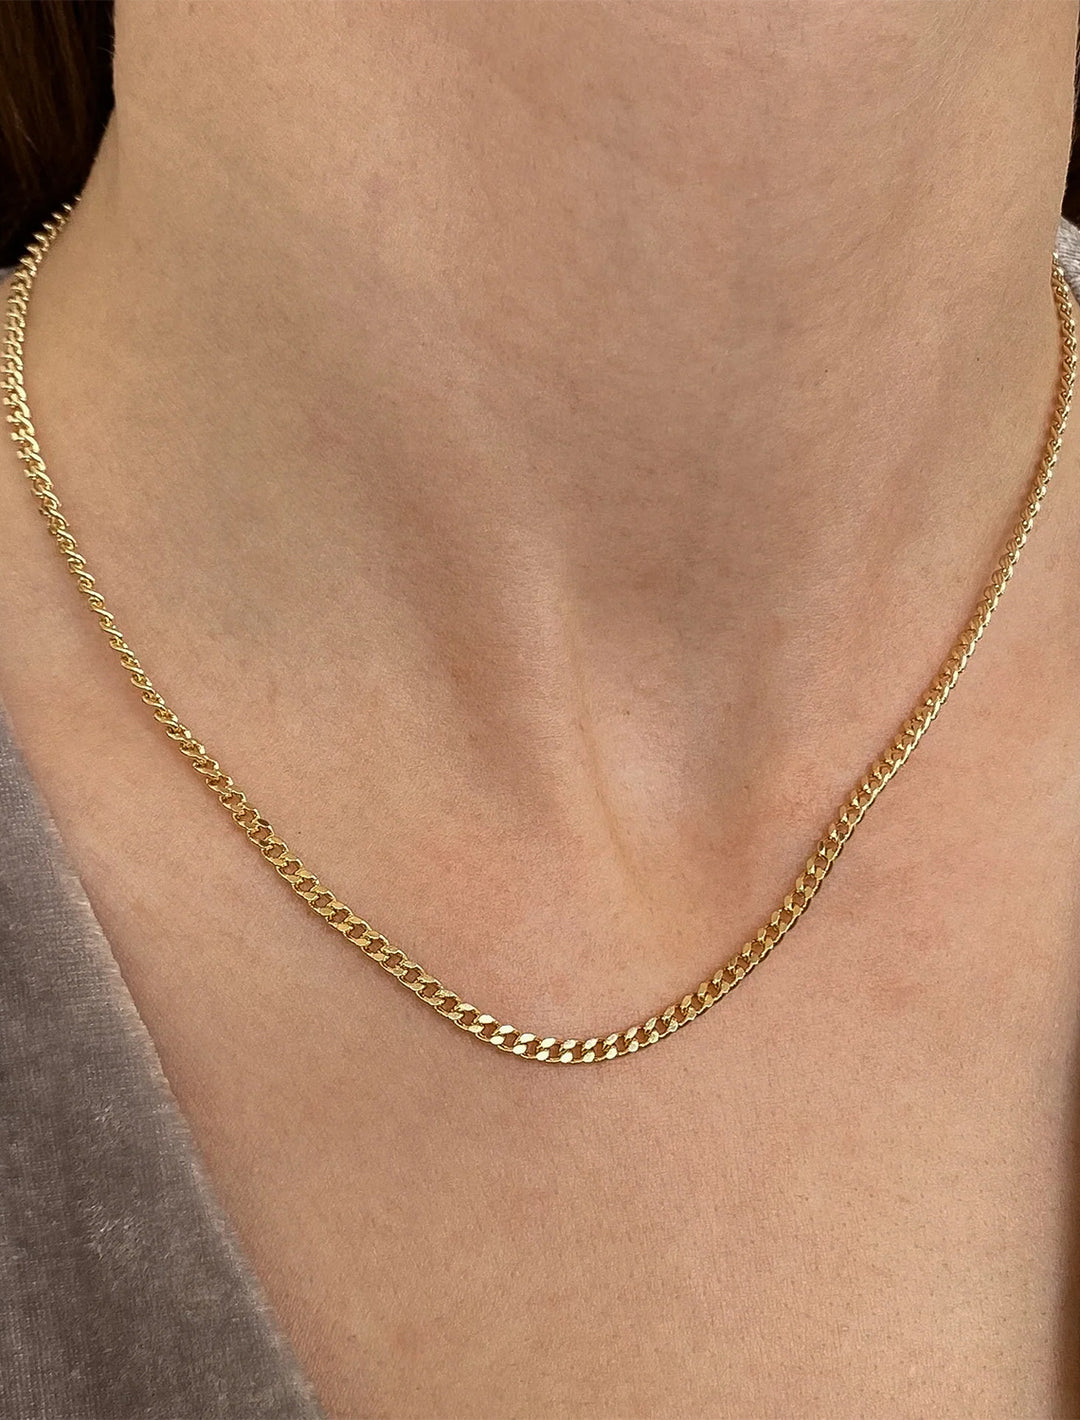 mini drew curb necklace in gold